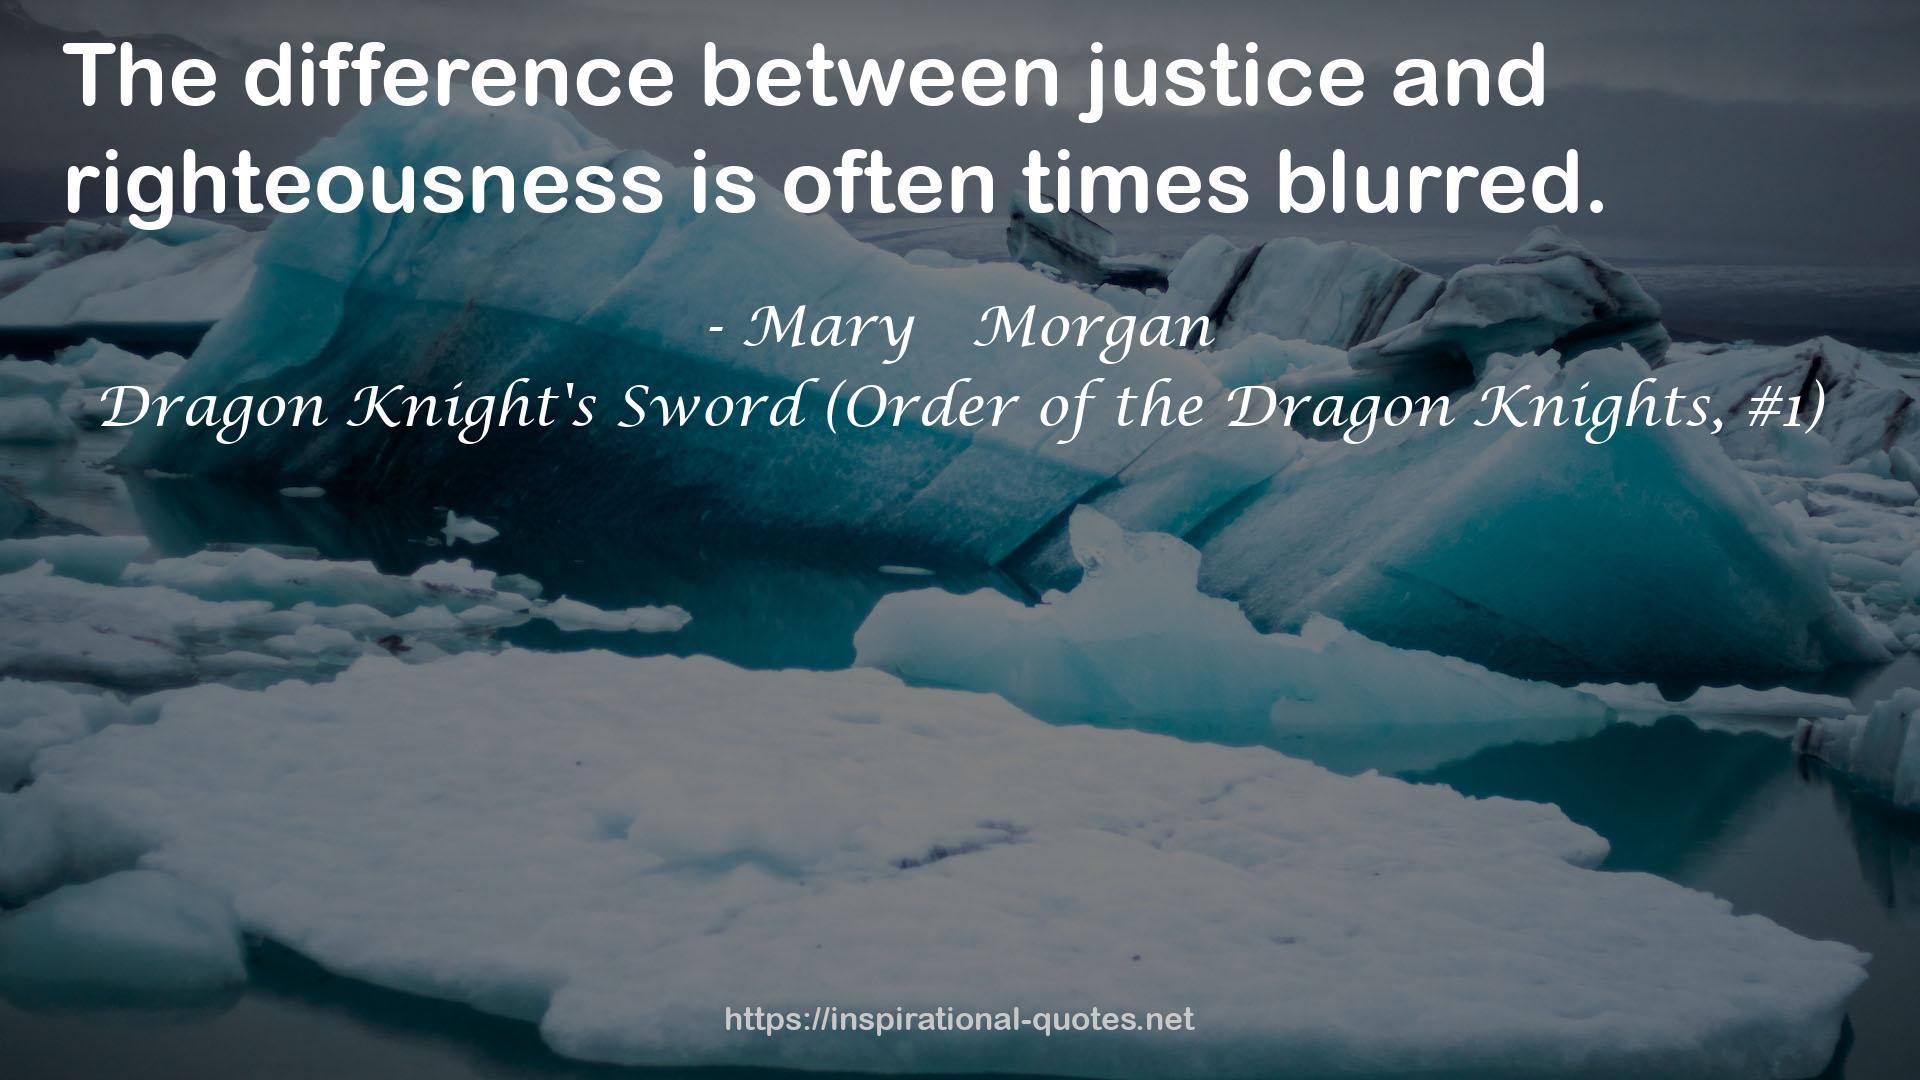 Dragon Knight's Sword (Order of the Dragon Knights, #1) QUOTES